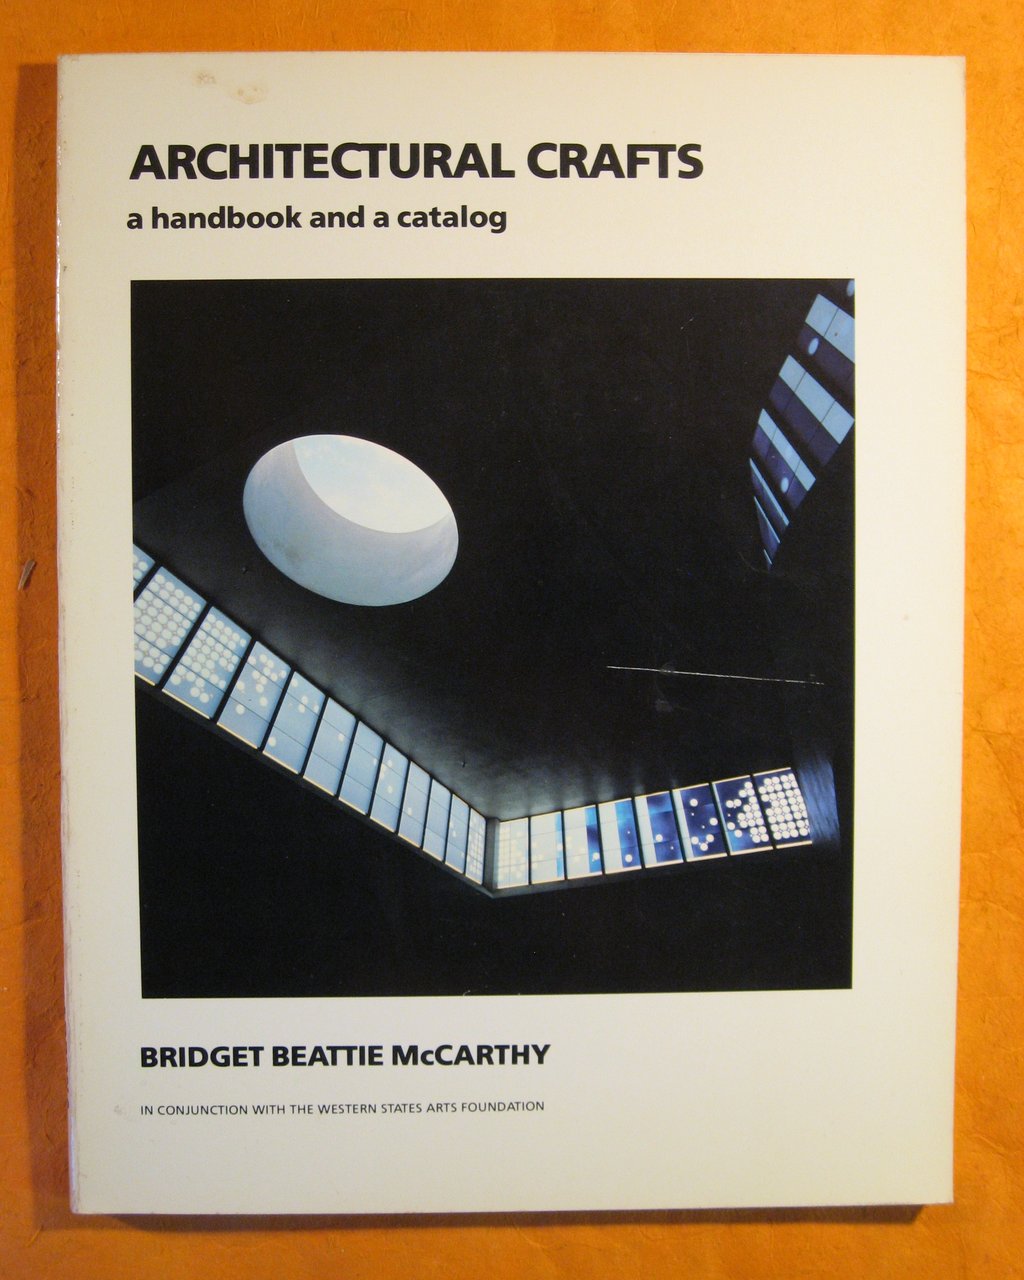 Architectural Crafts: A Handbook and a Catalog